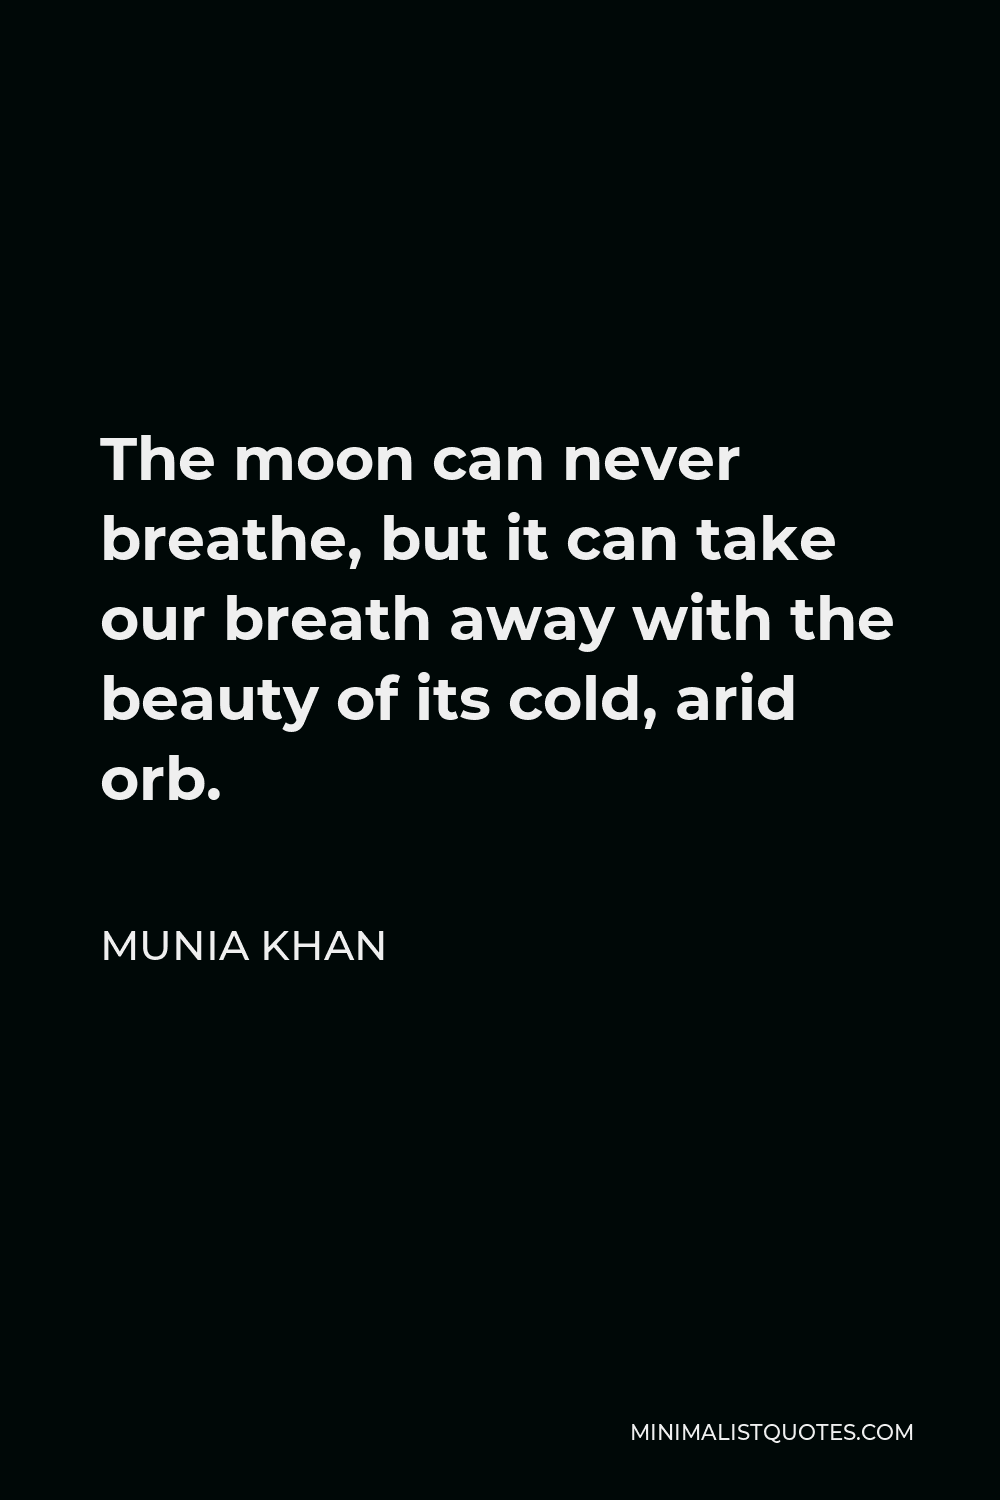 Munia Khan Quote - The moon can never breathe, but it can take our breath away with the beauty of its cold, arid orb.